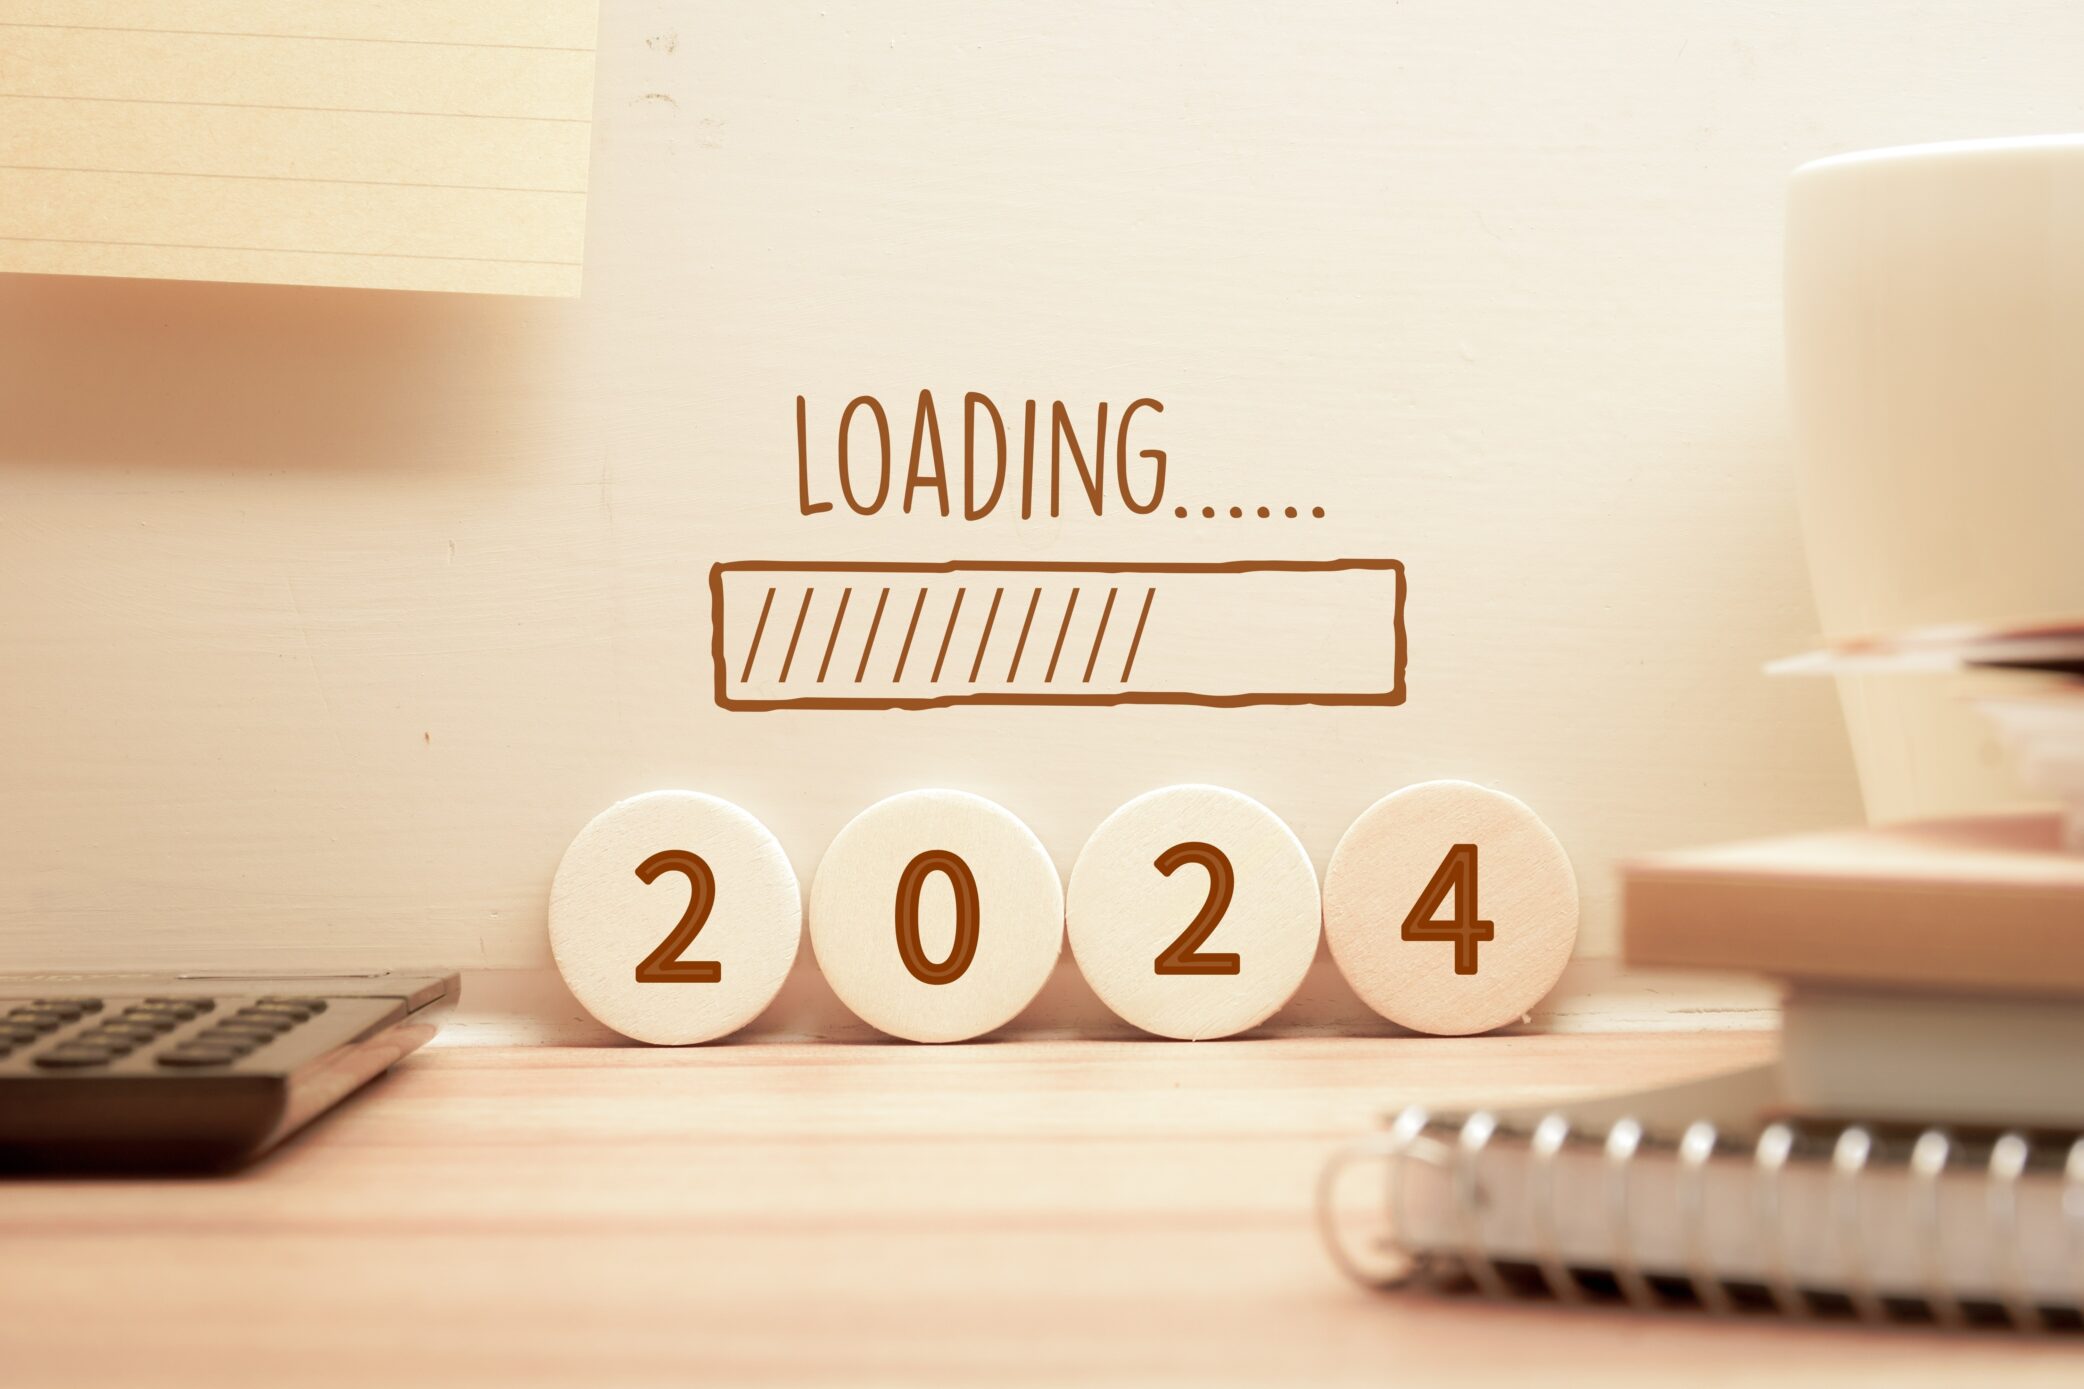 Computer loading message with the numbers 2024